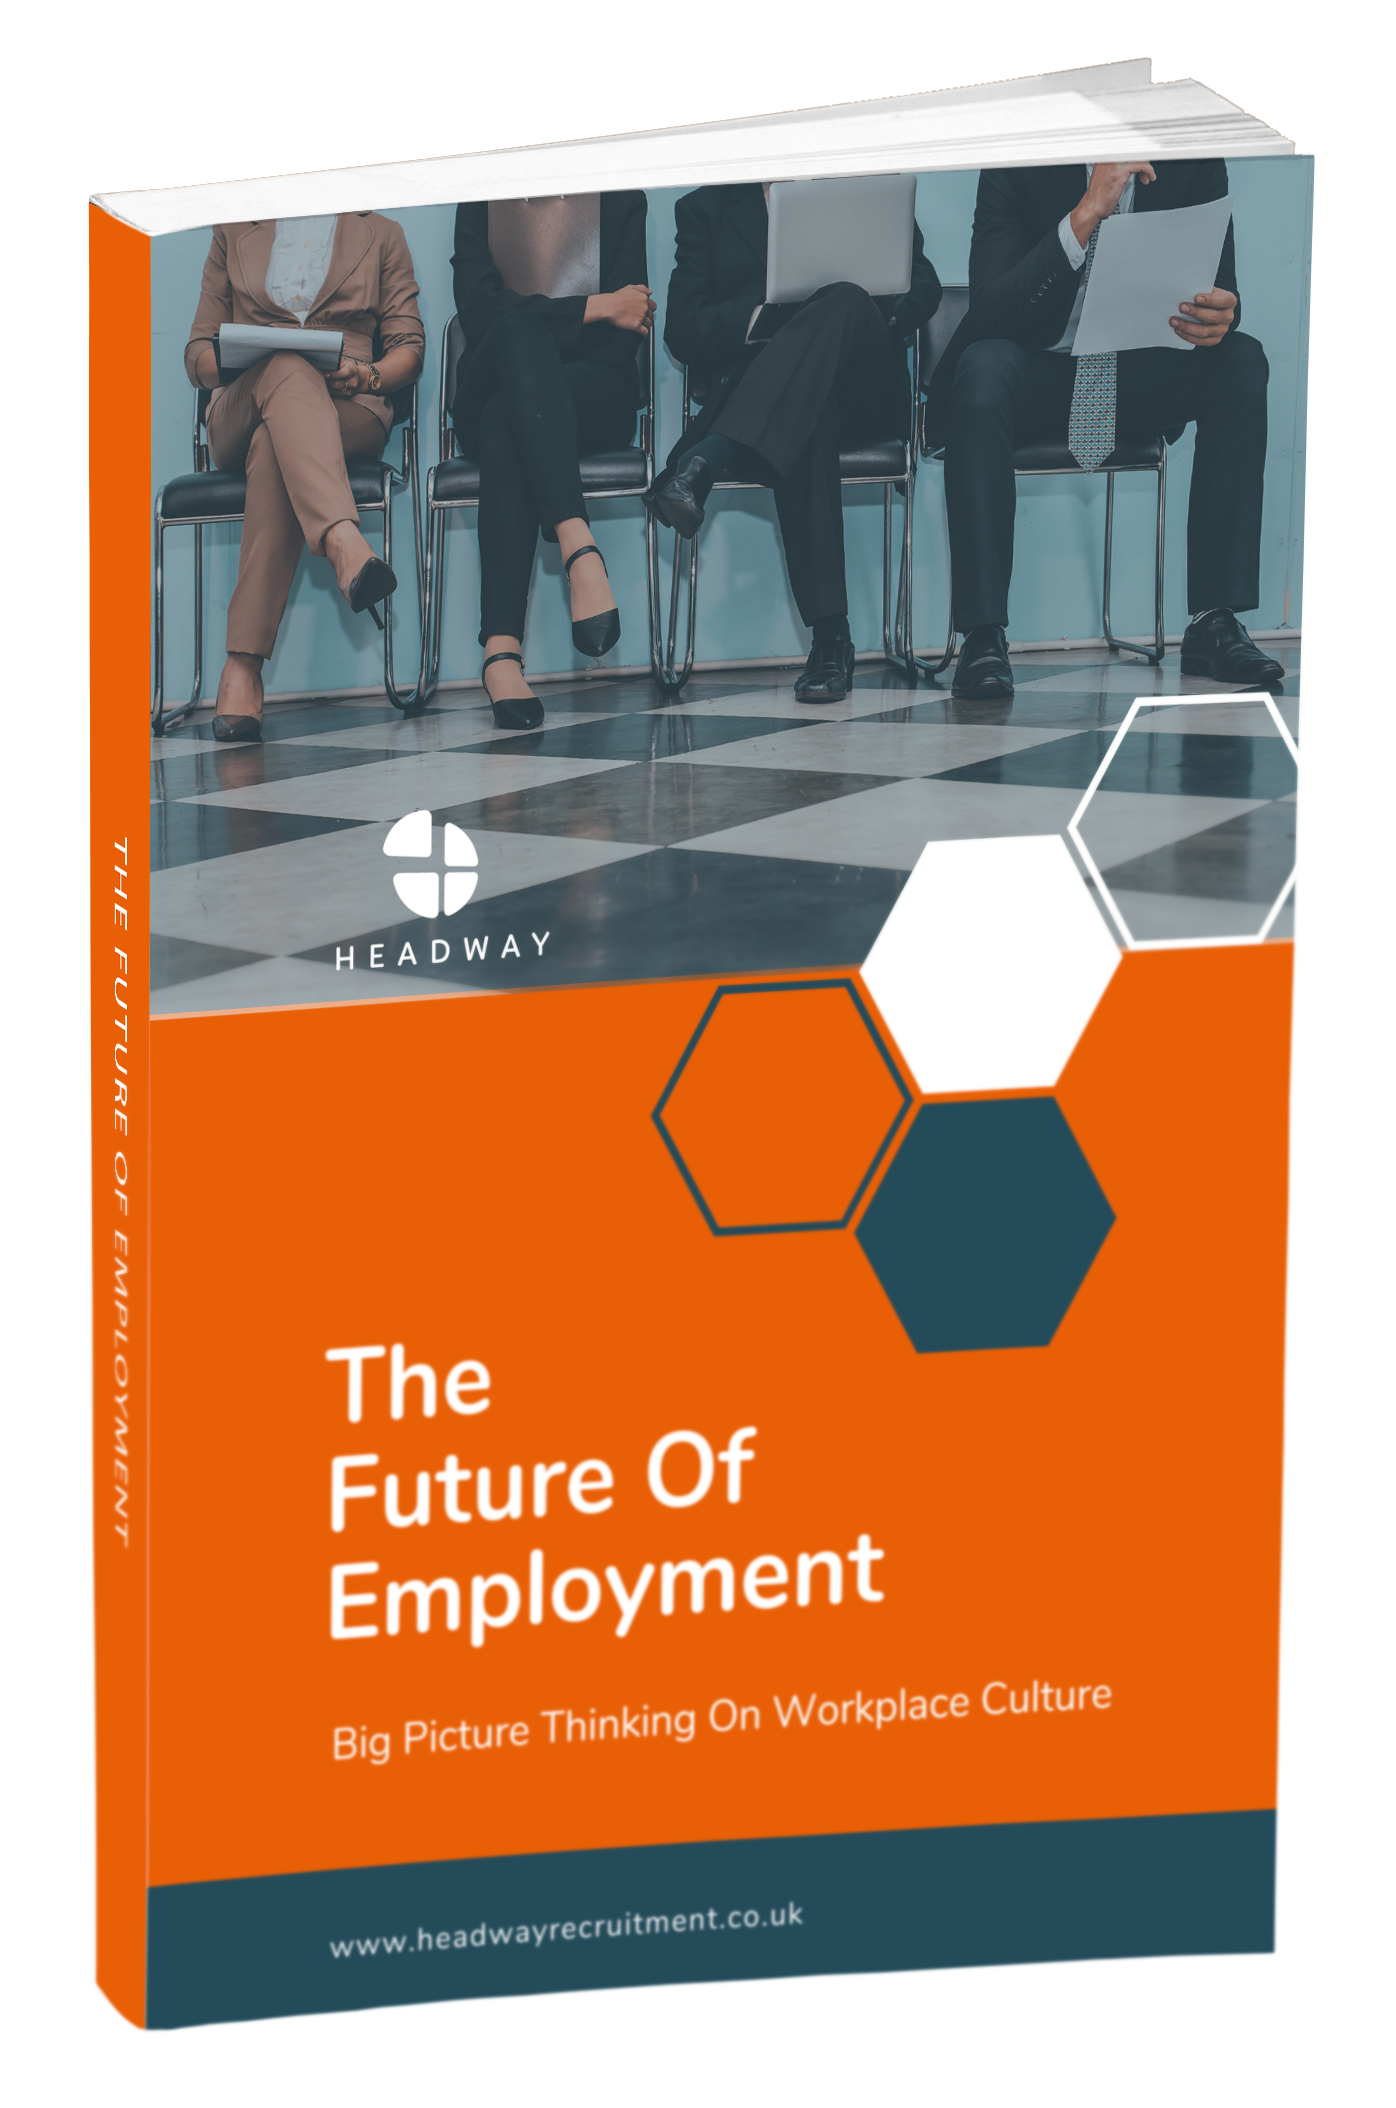 headway-future-of-employment-guide-mockup